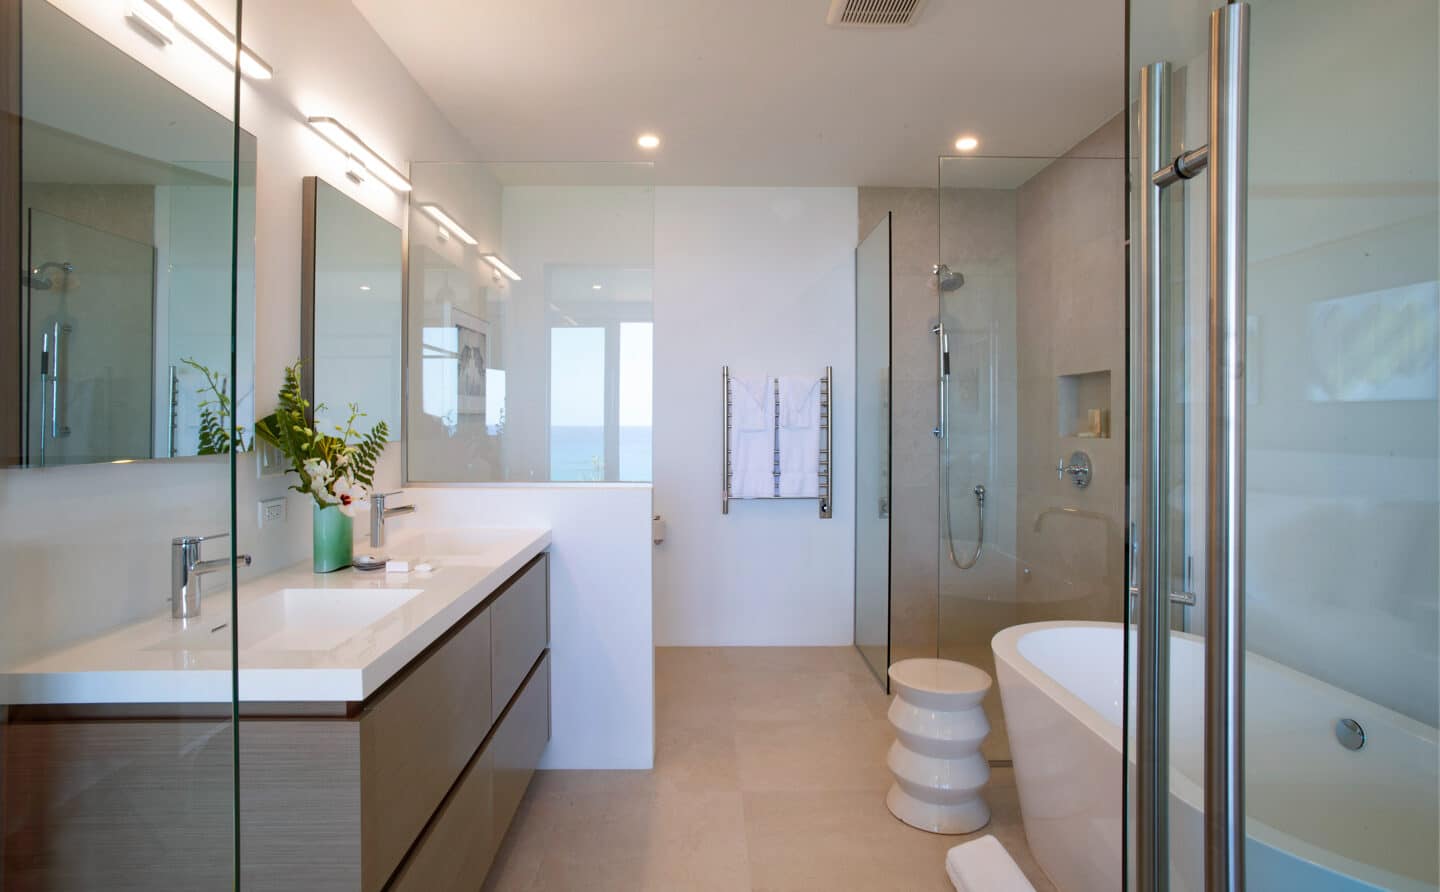 A bathroom with two sinks, a shower, and a bathtub.